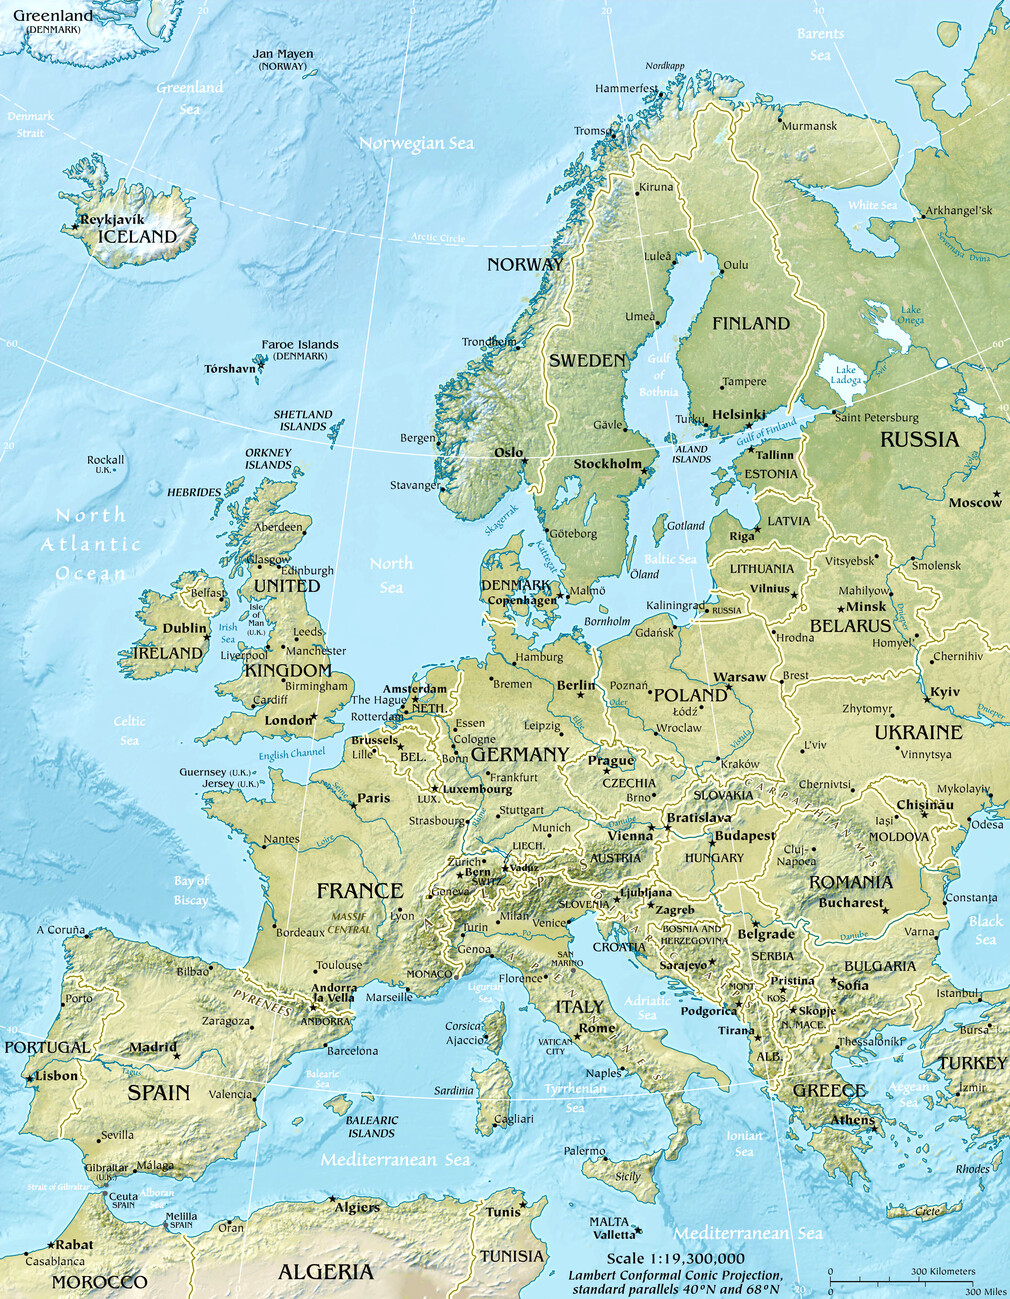 physical map of europe seas